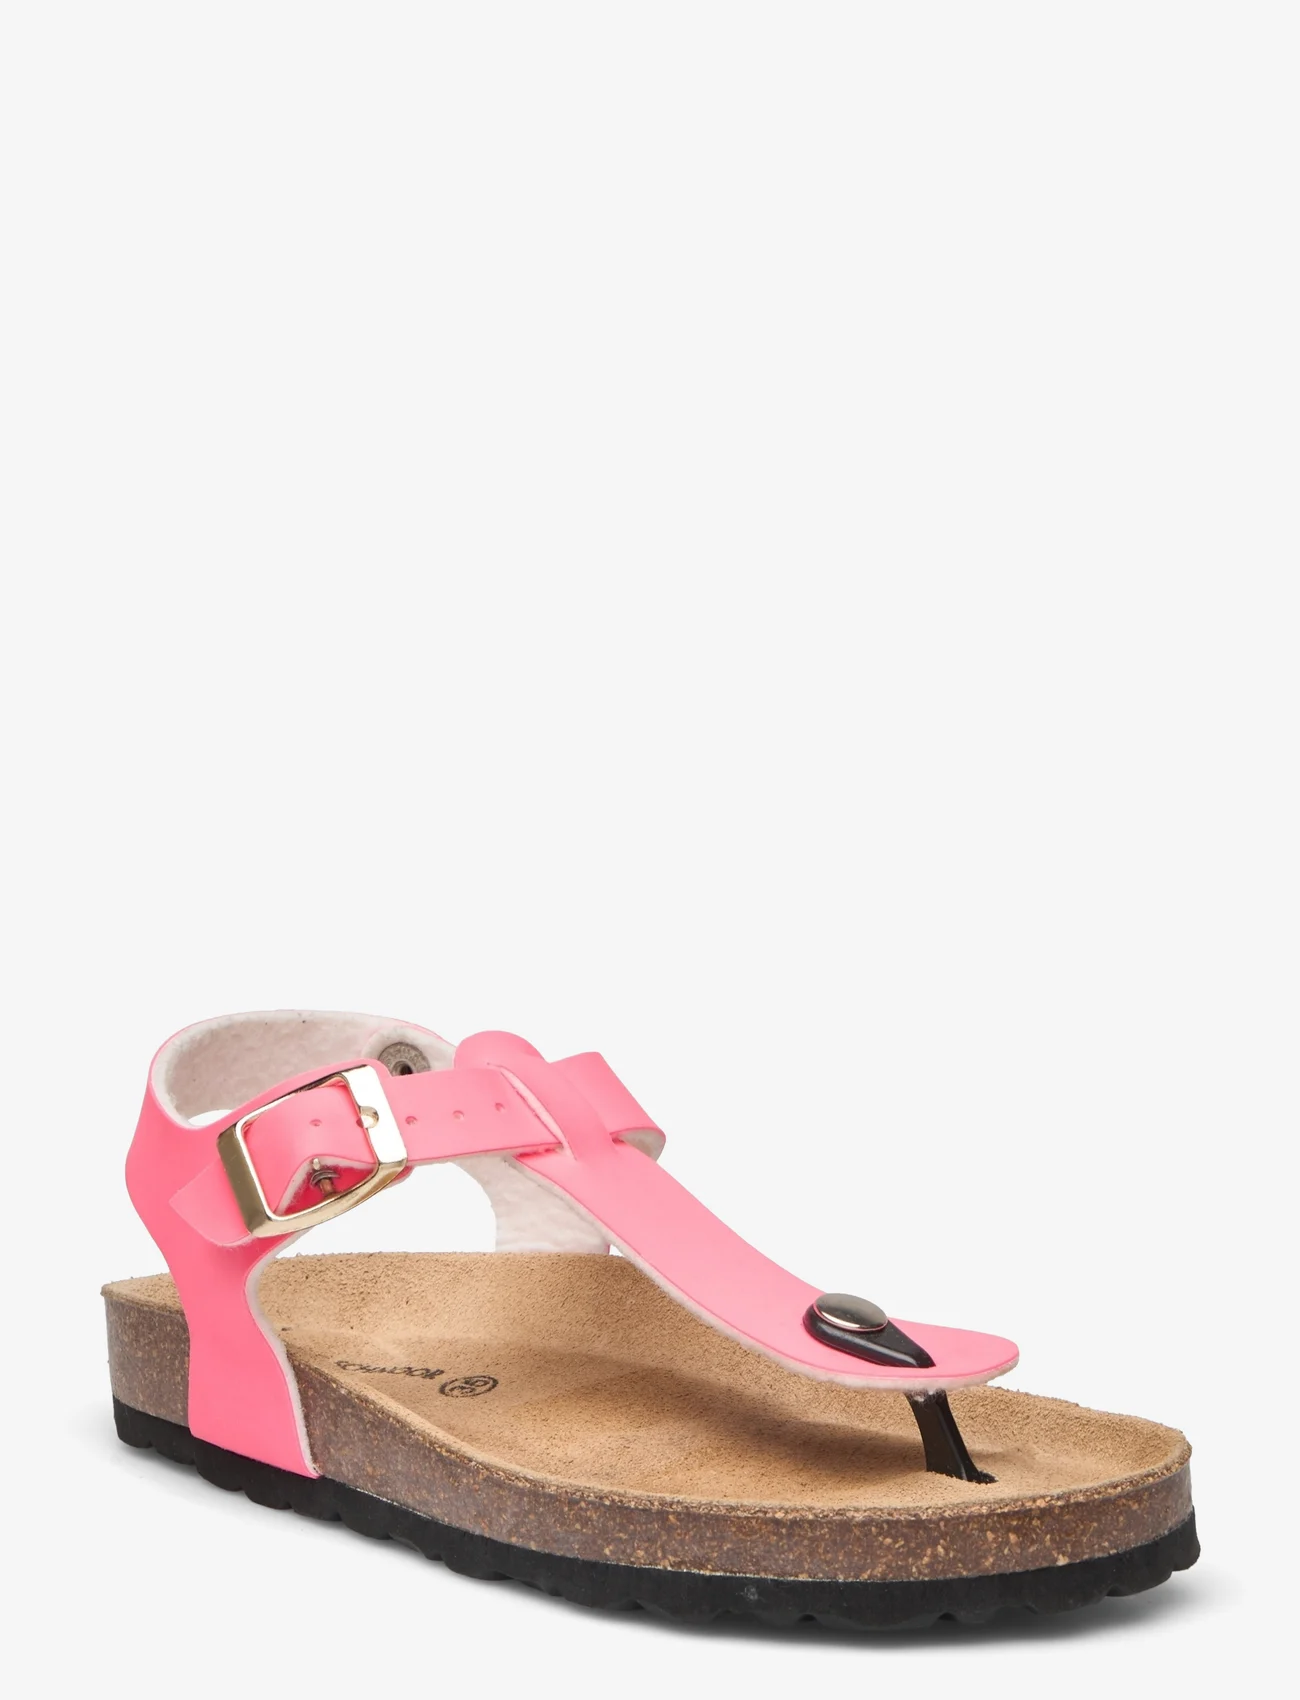 Sofie Schnoor Baby and Kids - Sandal lacquer - sandaler - coral pink - 0